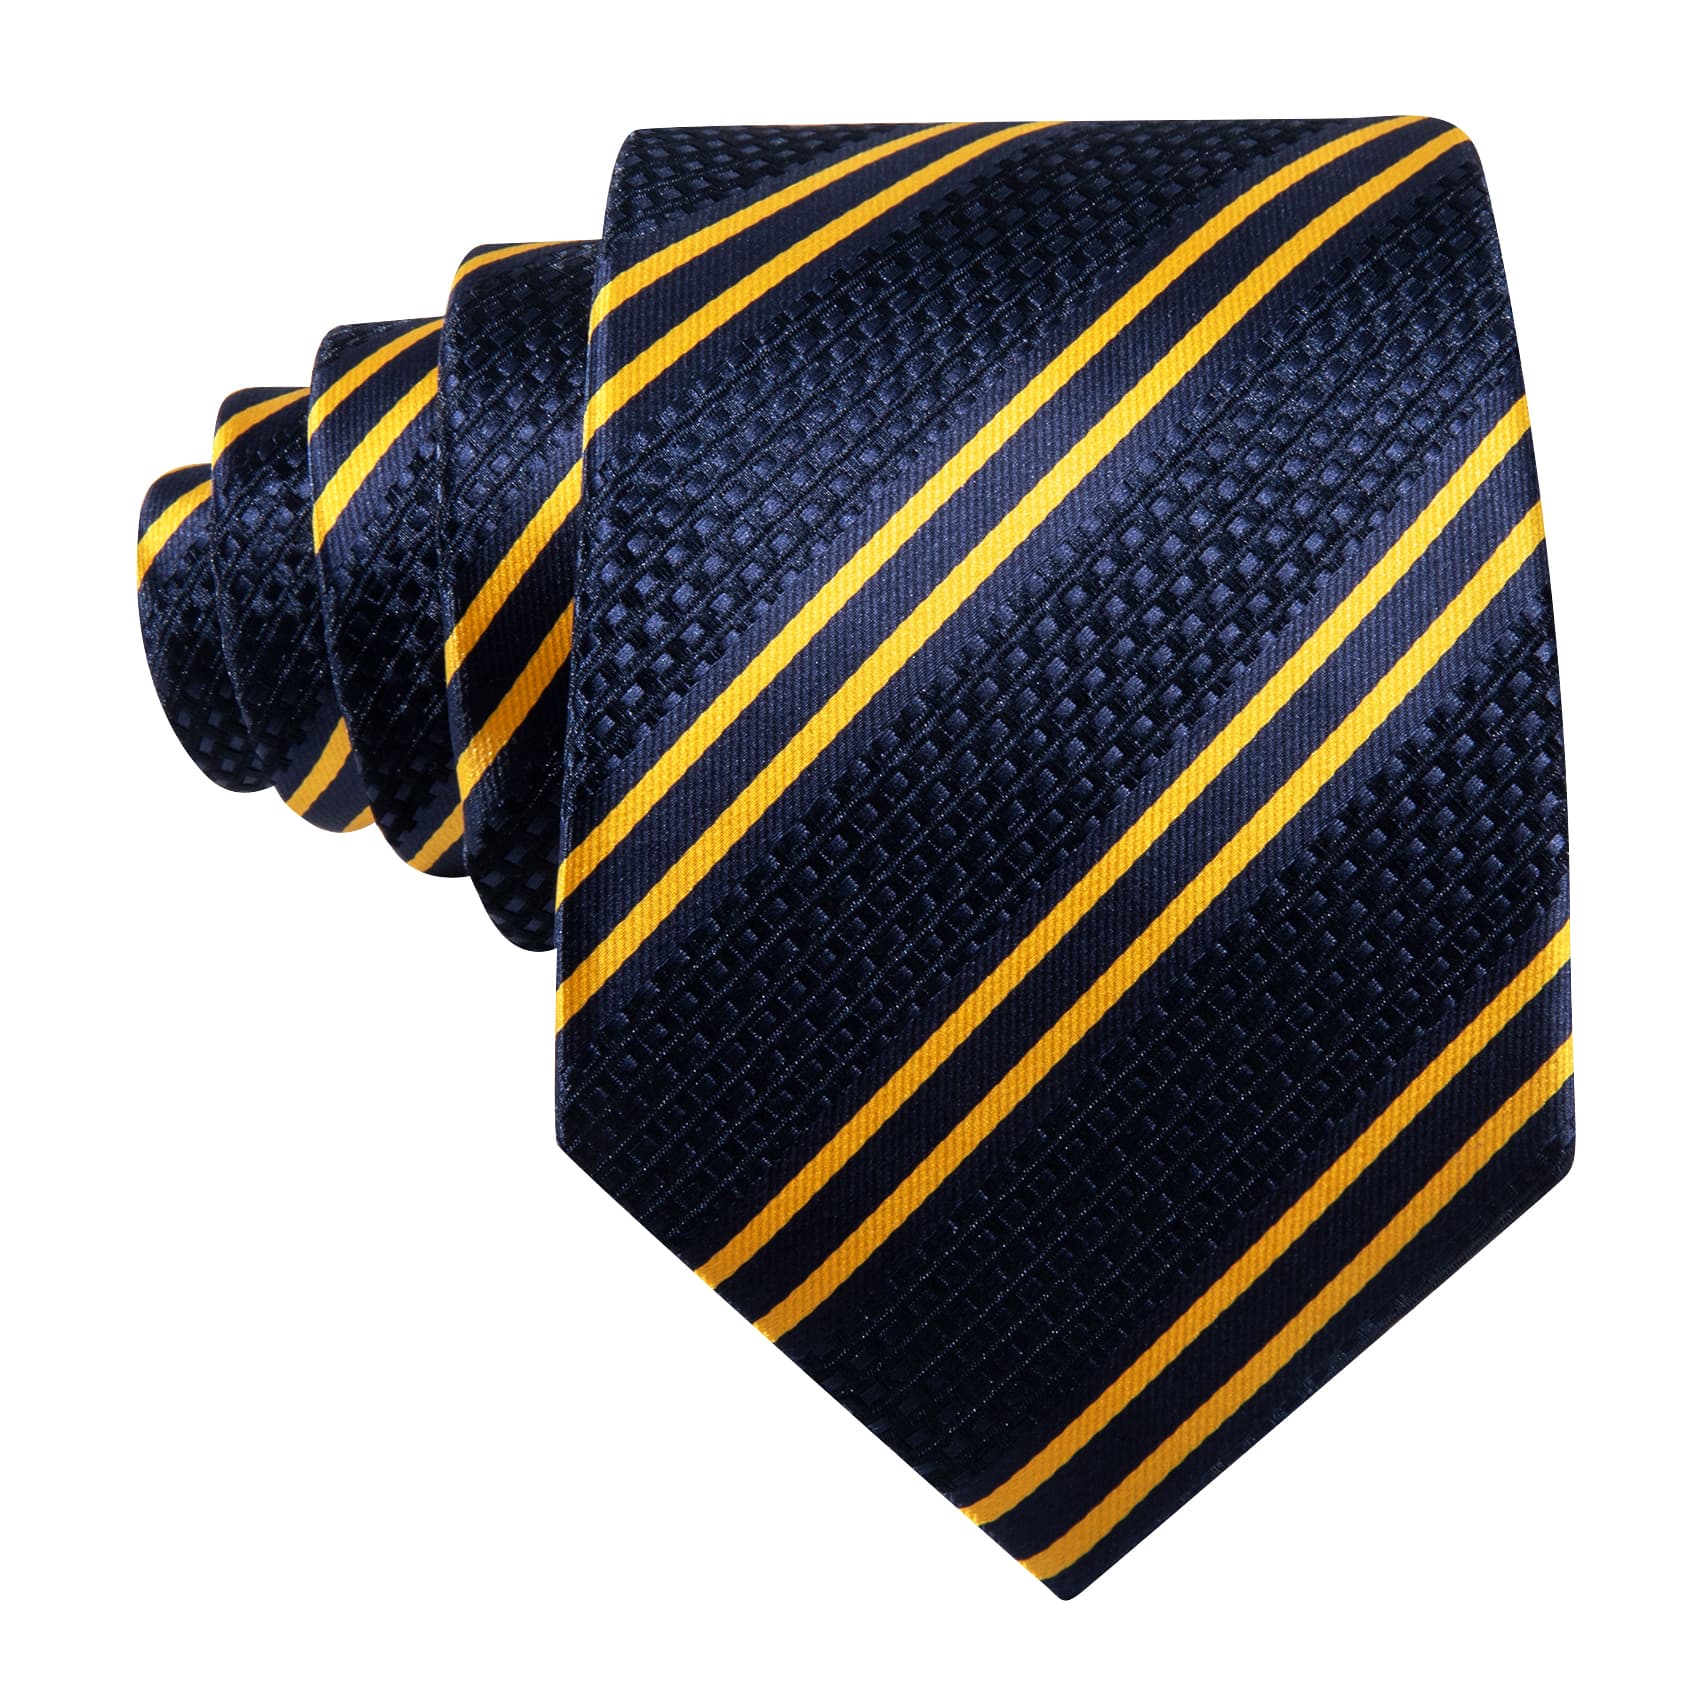  Blue Striped Tie with Yellow Stripes Men's Business Set